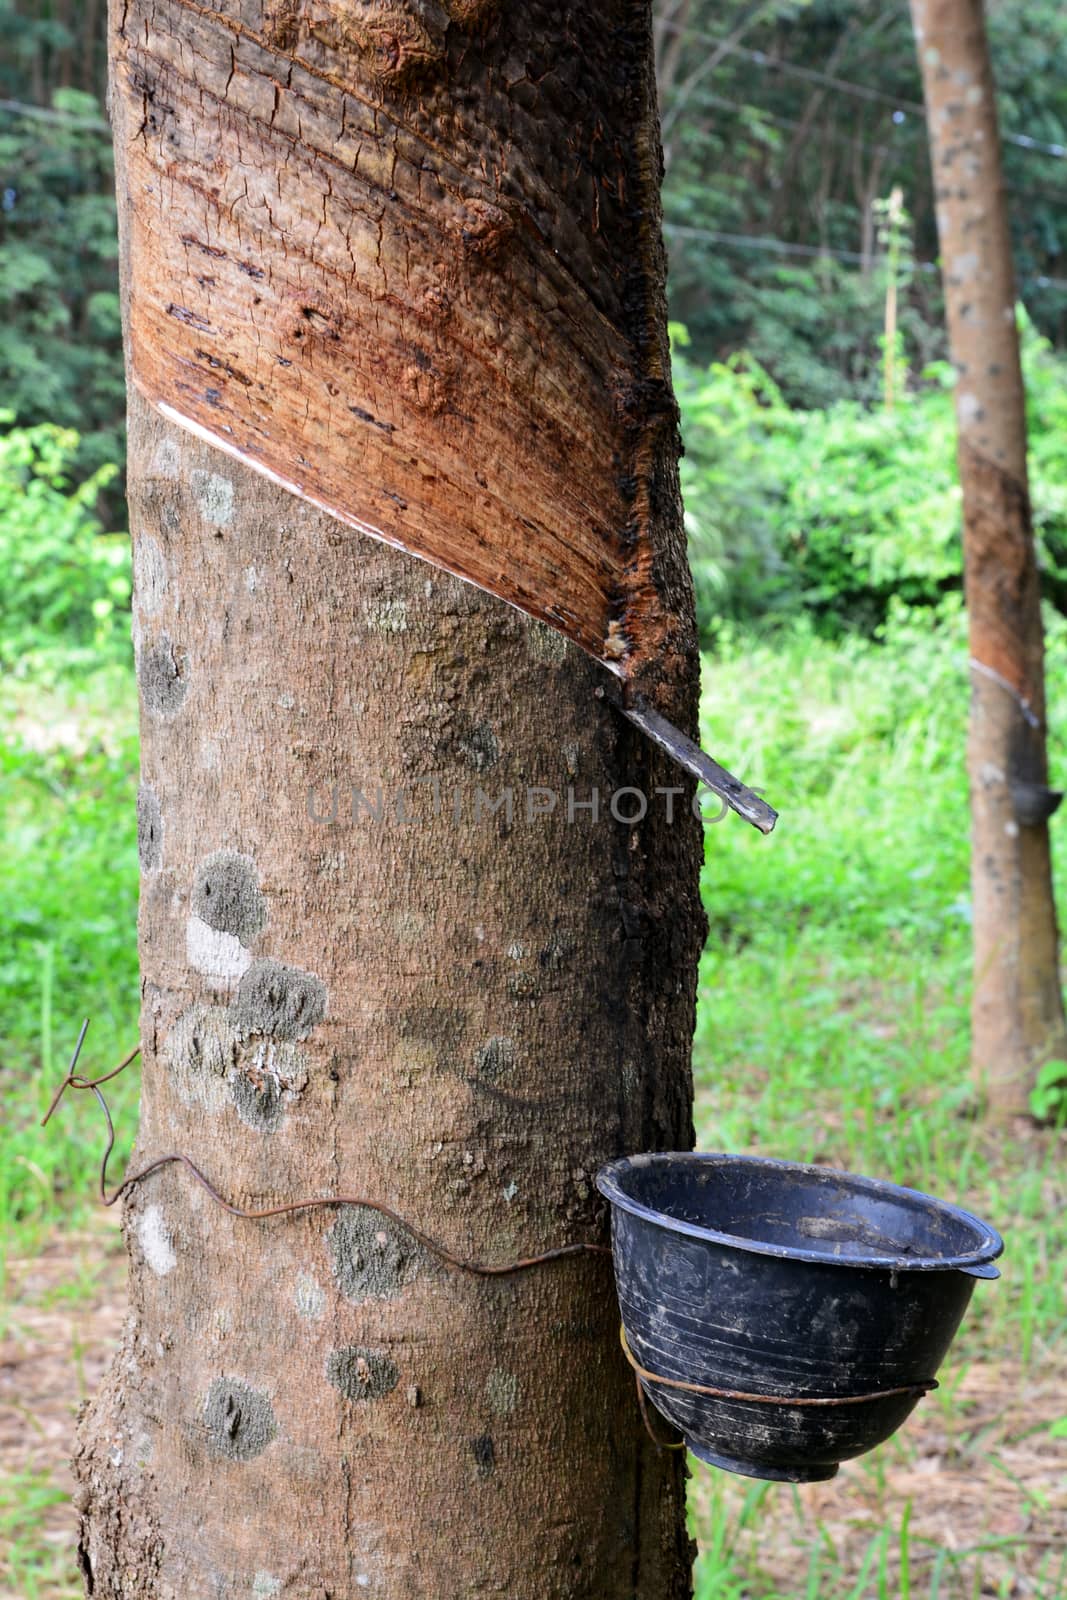 Row of para rubber tree in plantation by ideation90